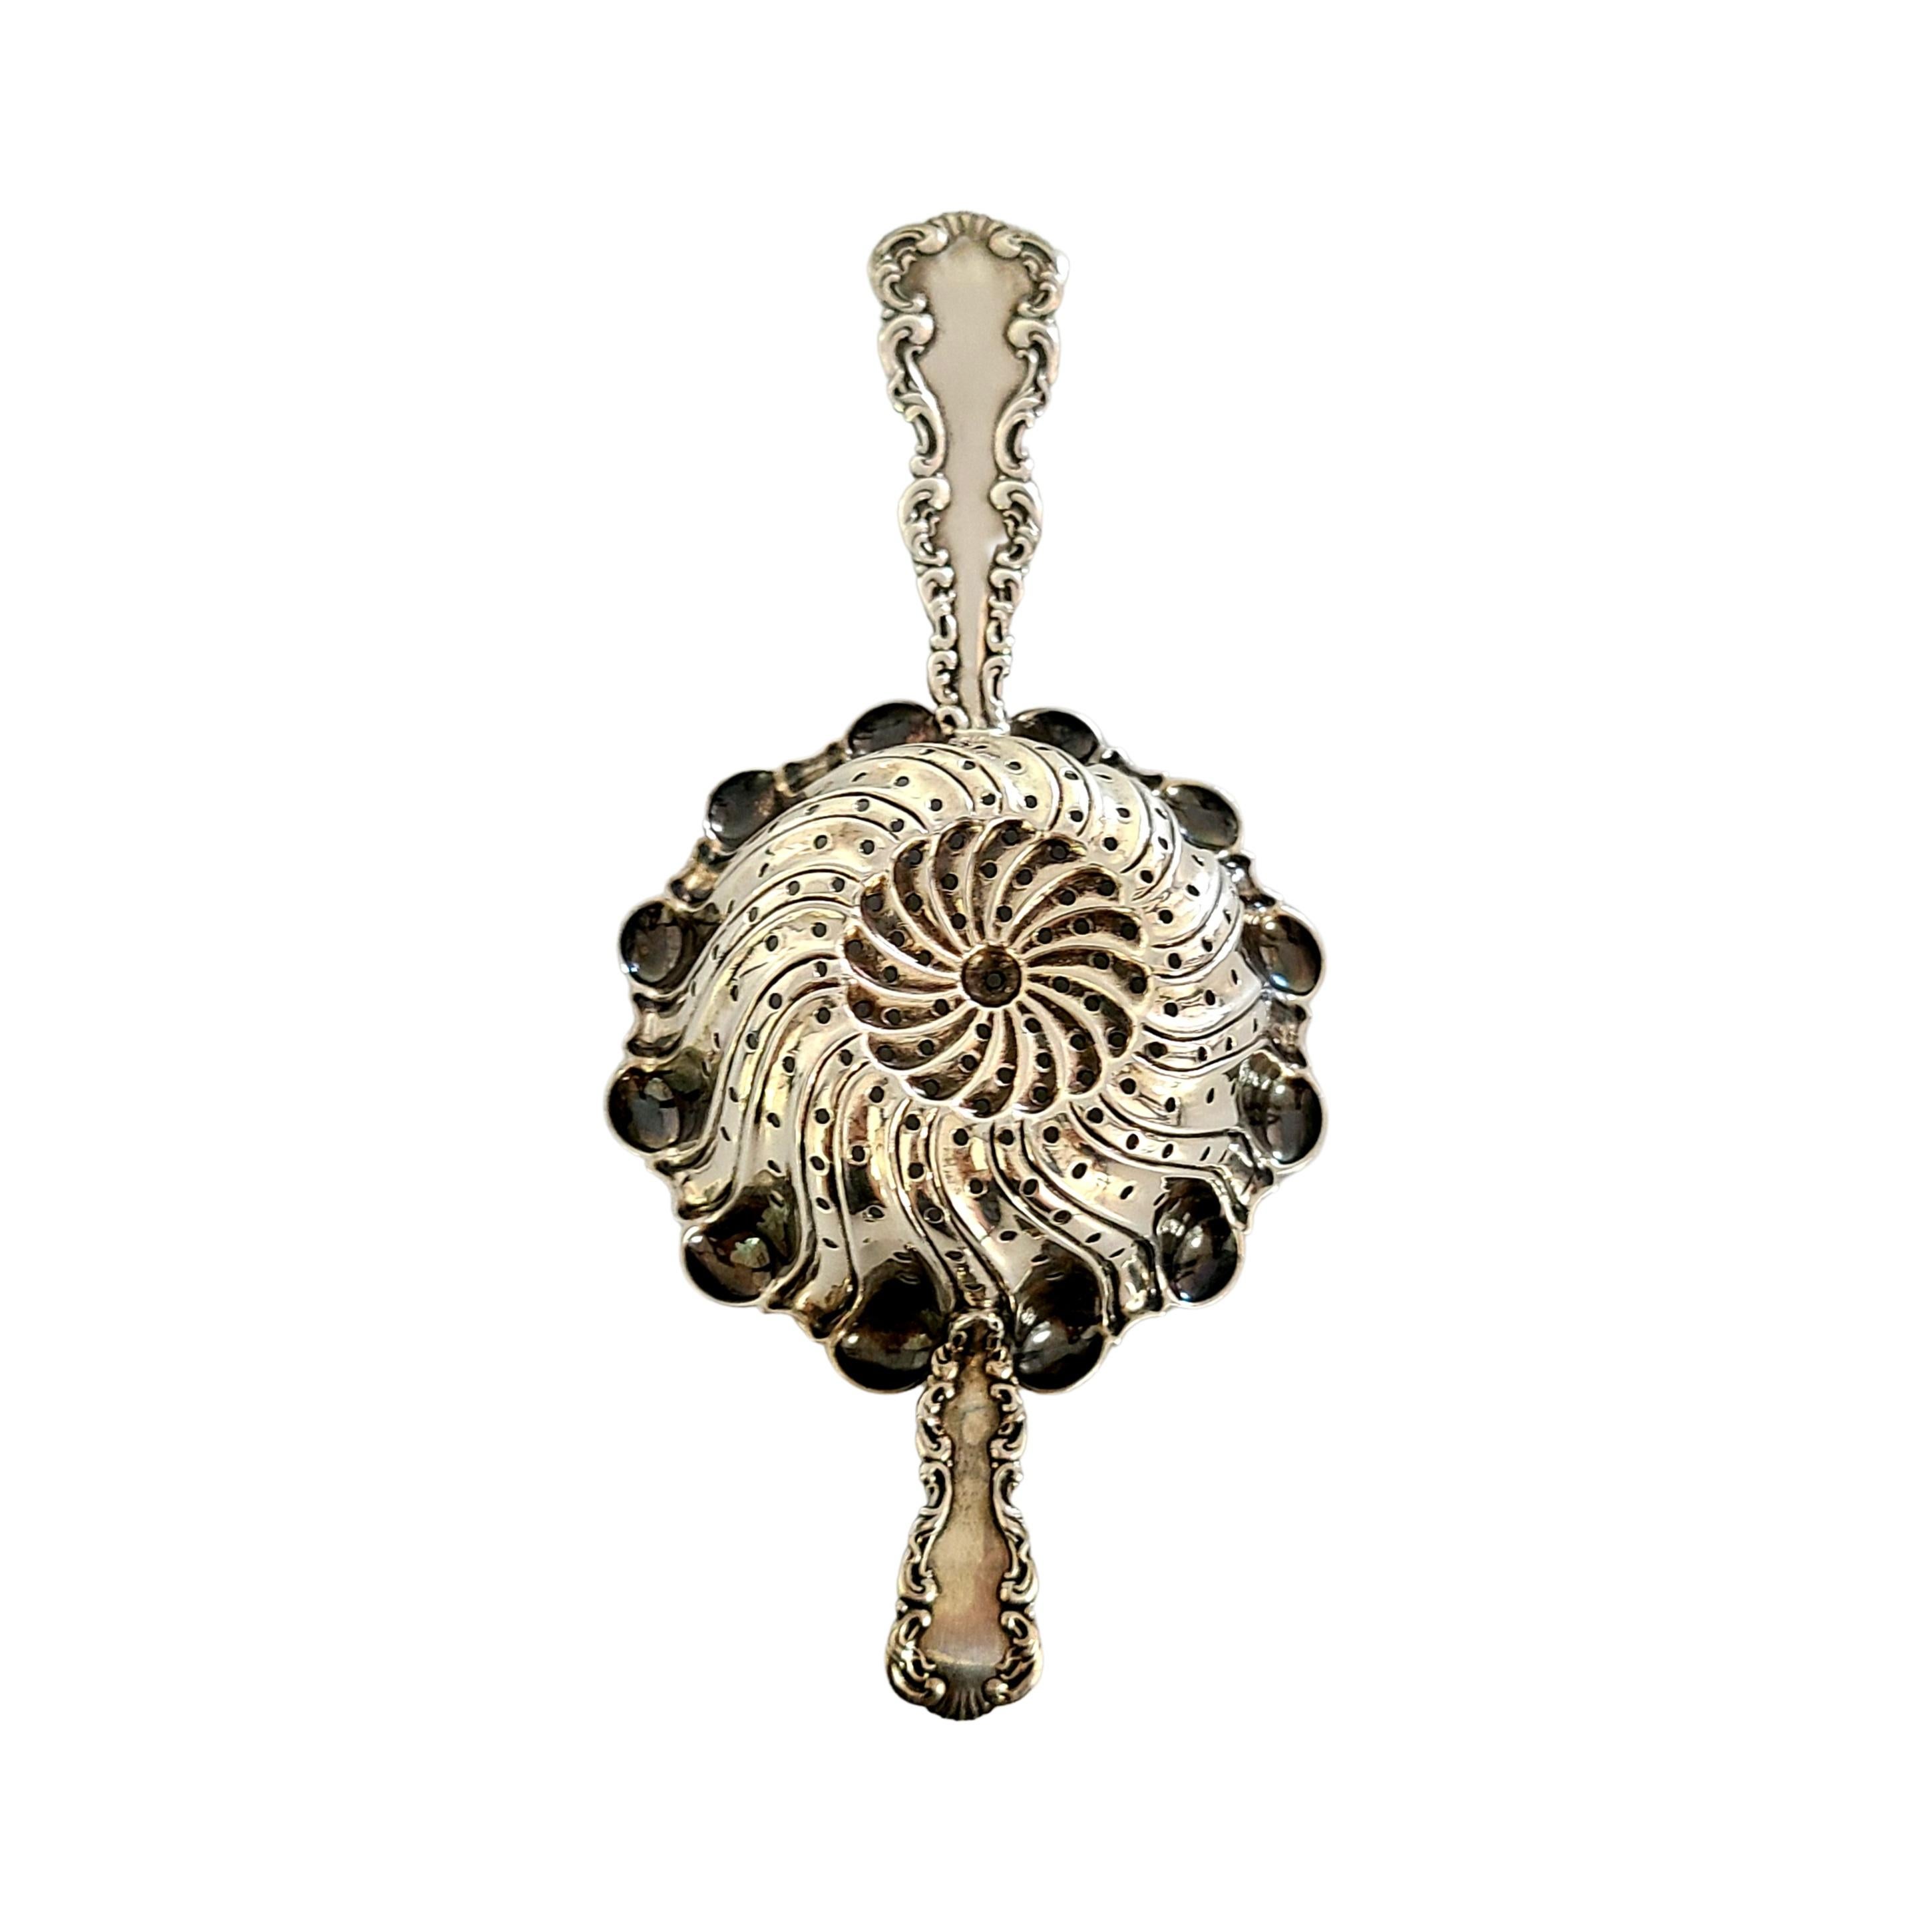 Sterling silver over the cup tea strainer in the Louis XV pattern, by Whiting Mfg Co, circa 1891.

Monogram appears to be S.

Louis XV pattern was designed by Charles Osborne in 1891. It features a flourish design on the handles around a pierced